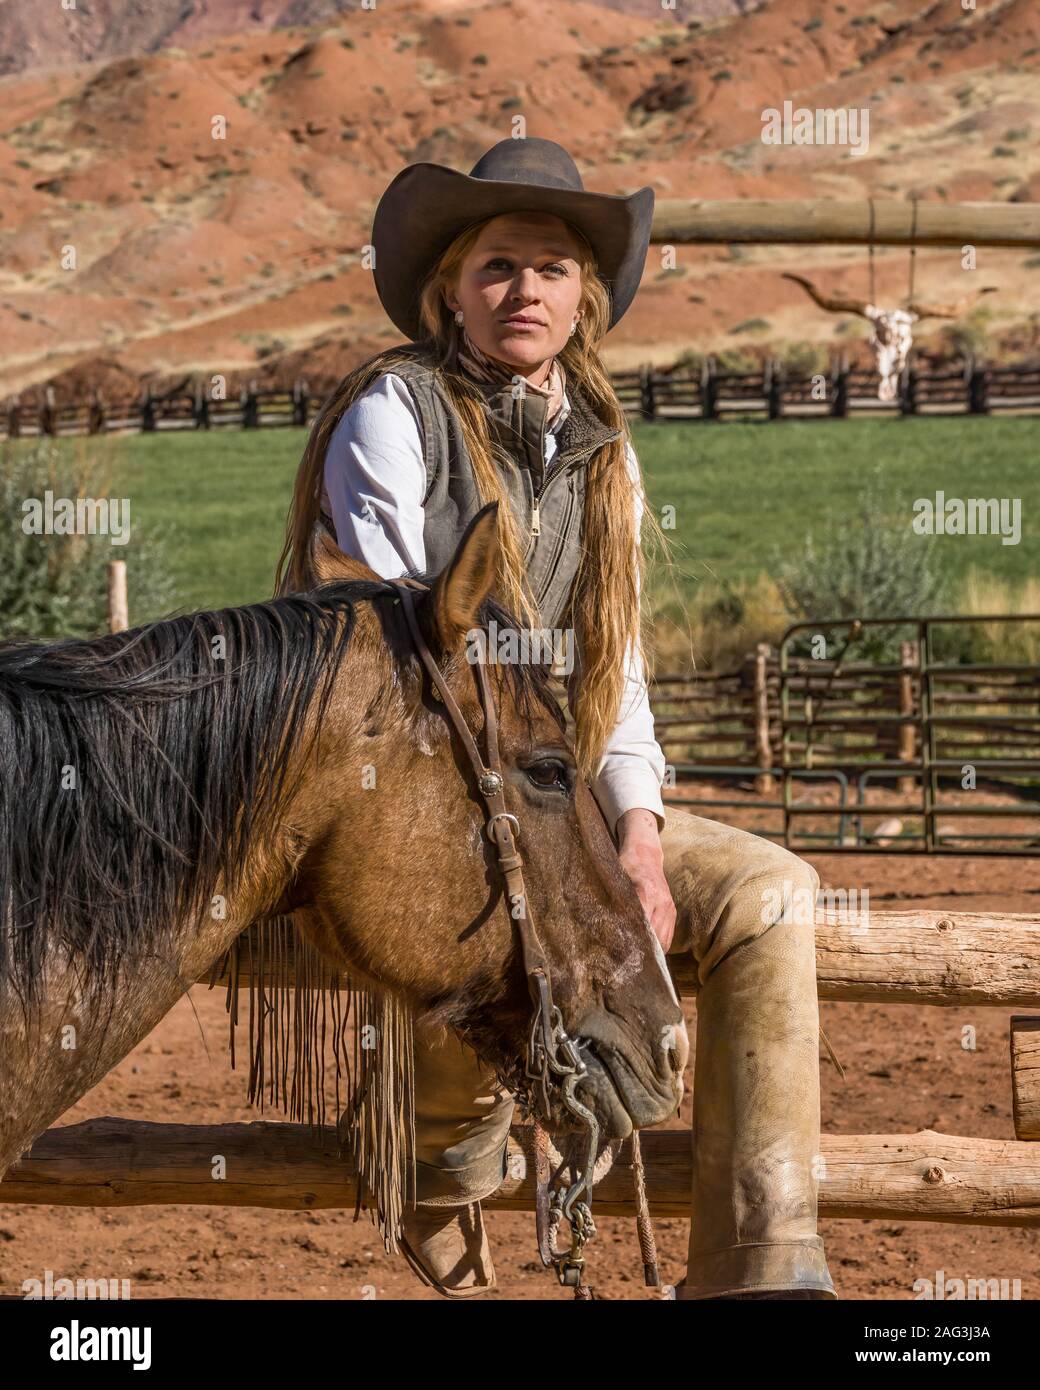 A young attractive working cowgirl wrangler sits on a wood rail fence by her horse on a ranch near Moab, Utah. Stock Photo